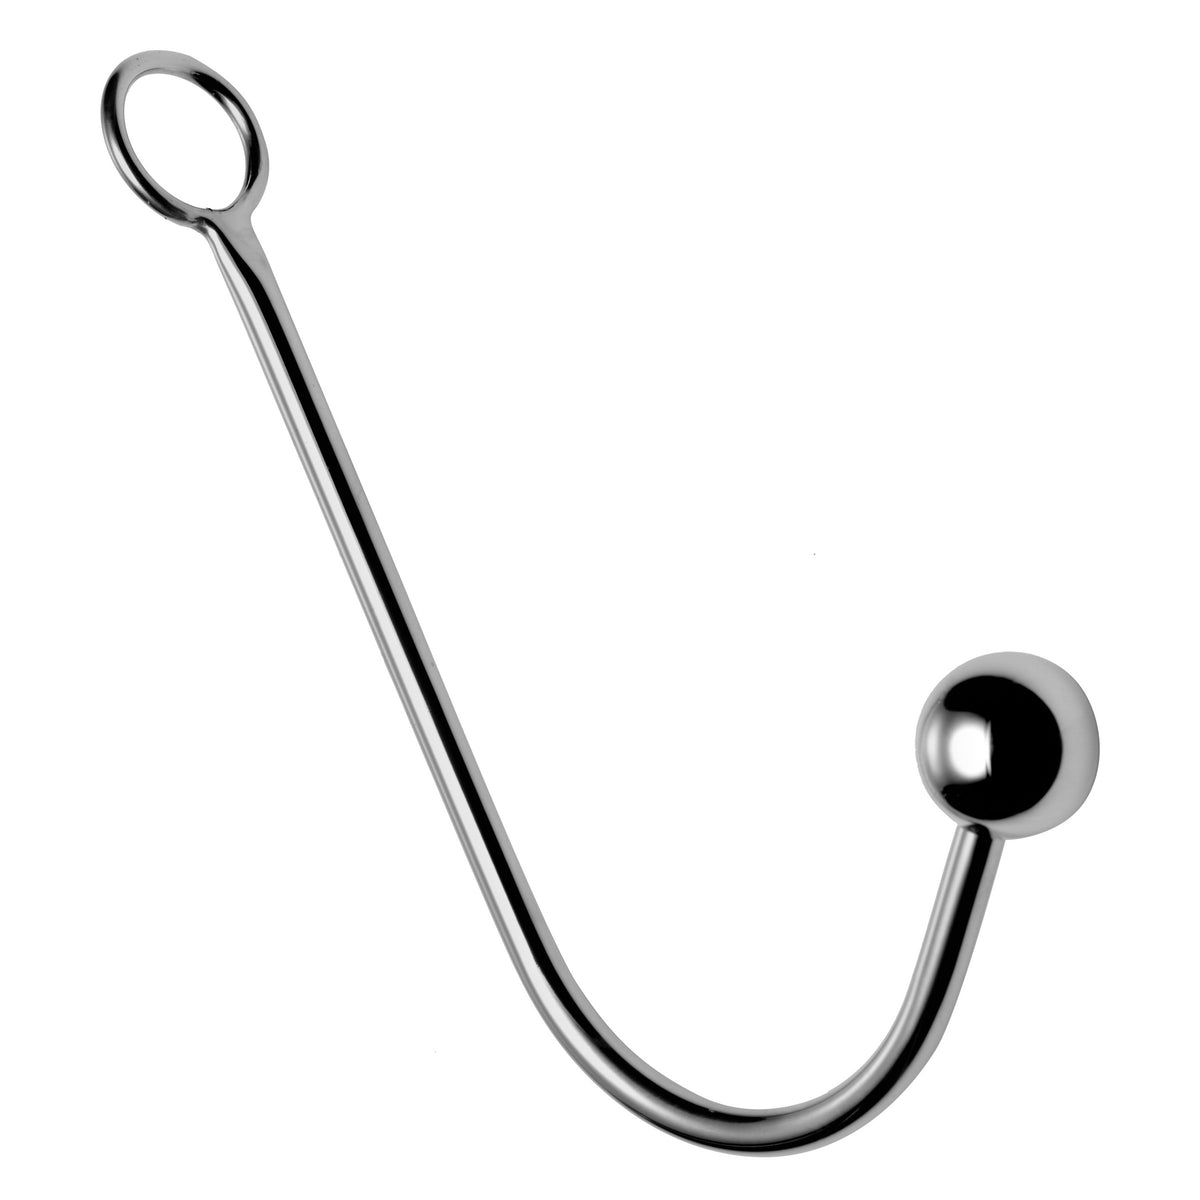 The Anal Hook